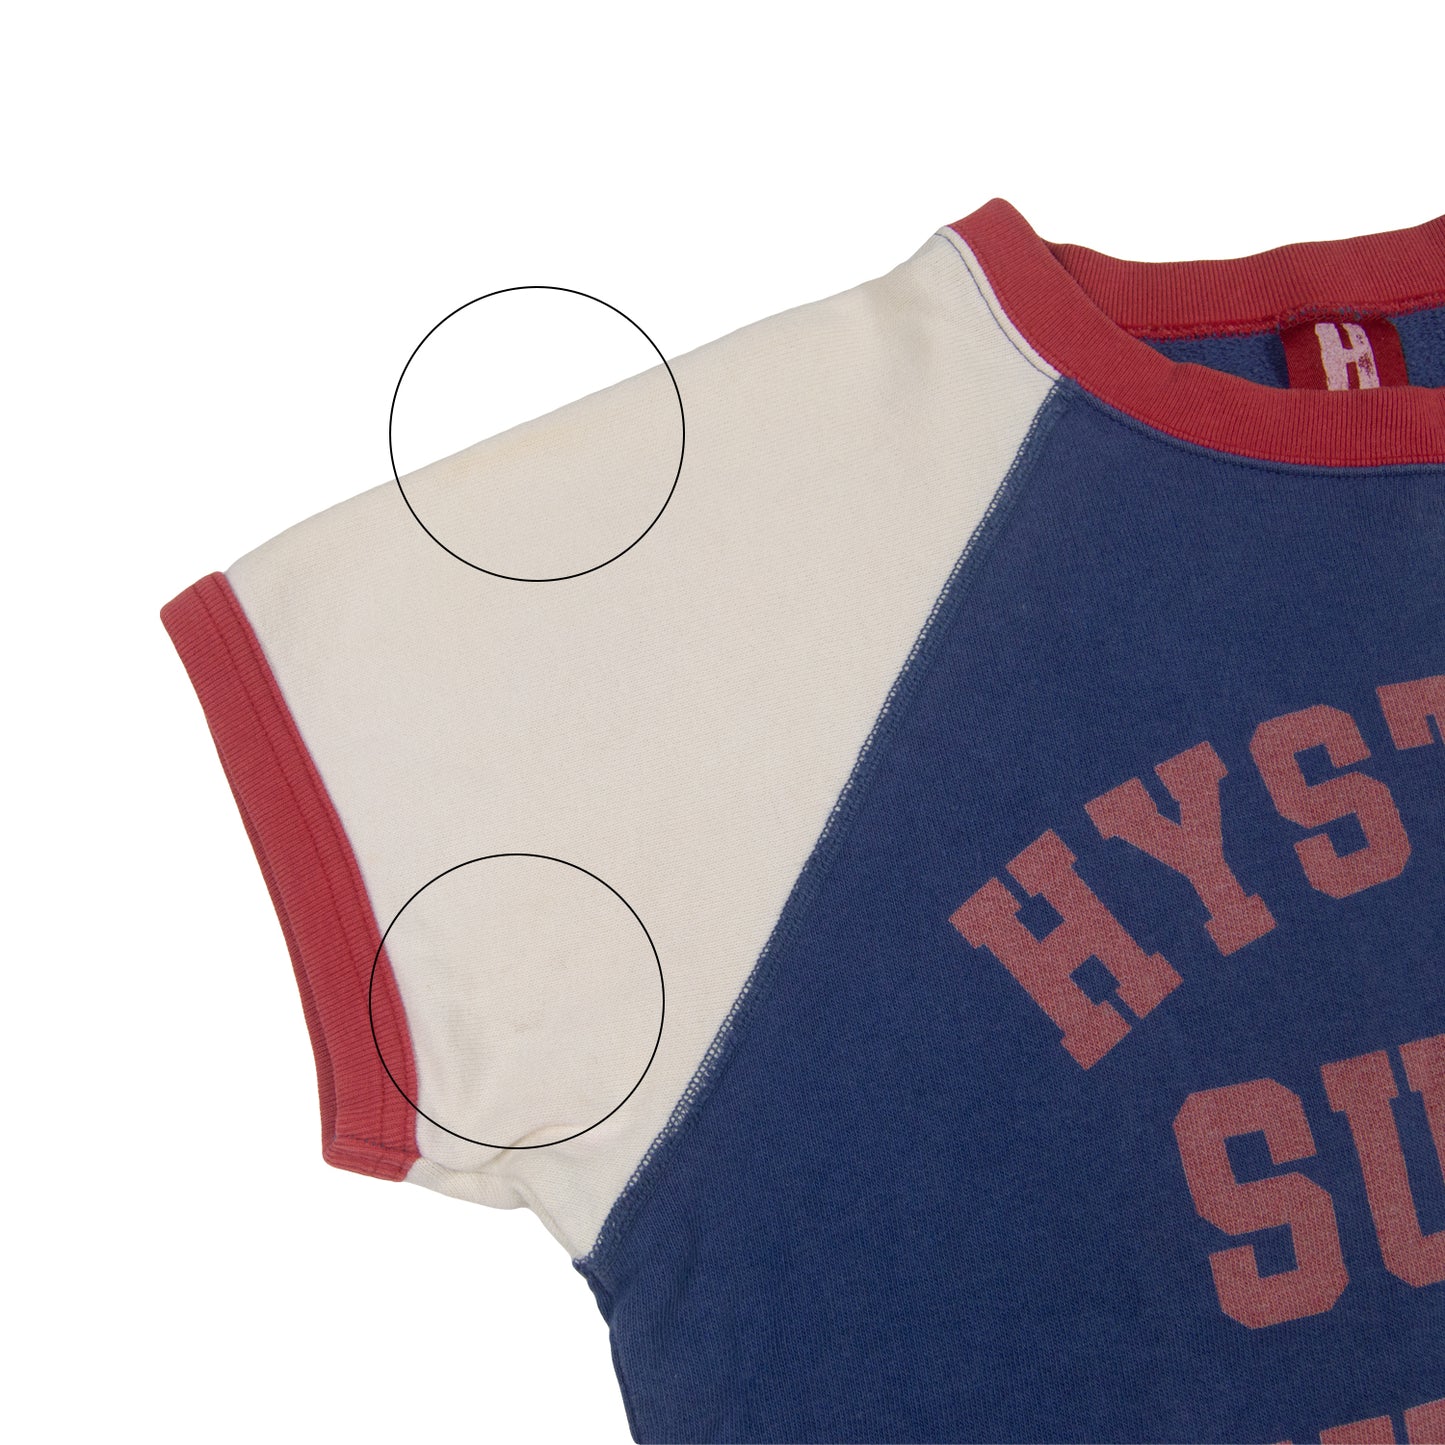 Hysteric Glamour Super Kustom French Terry Ringer Tee